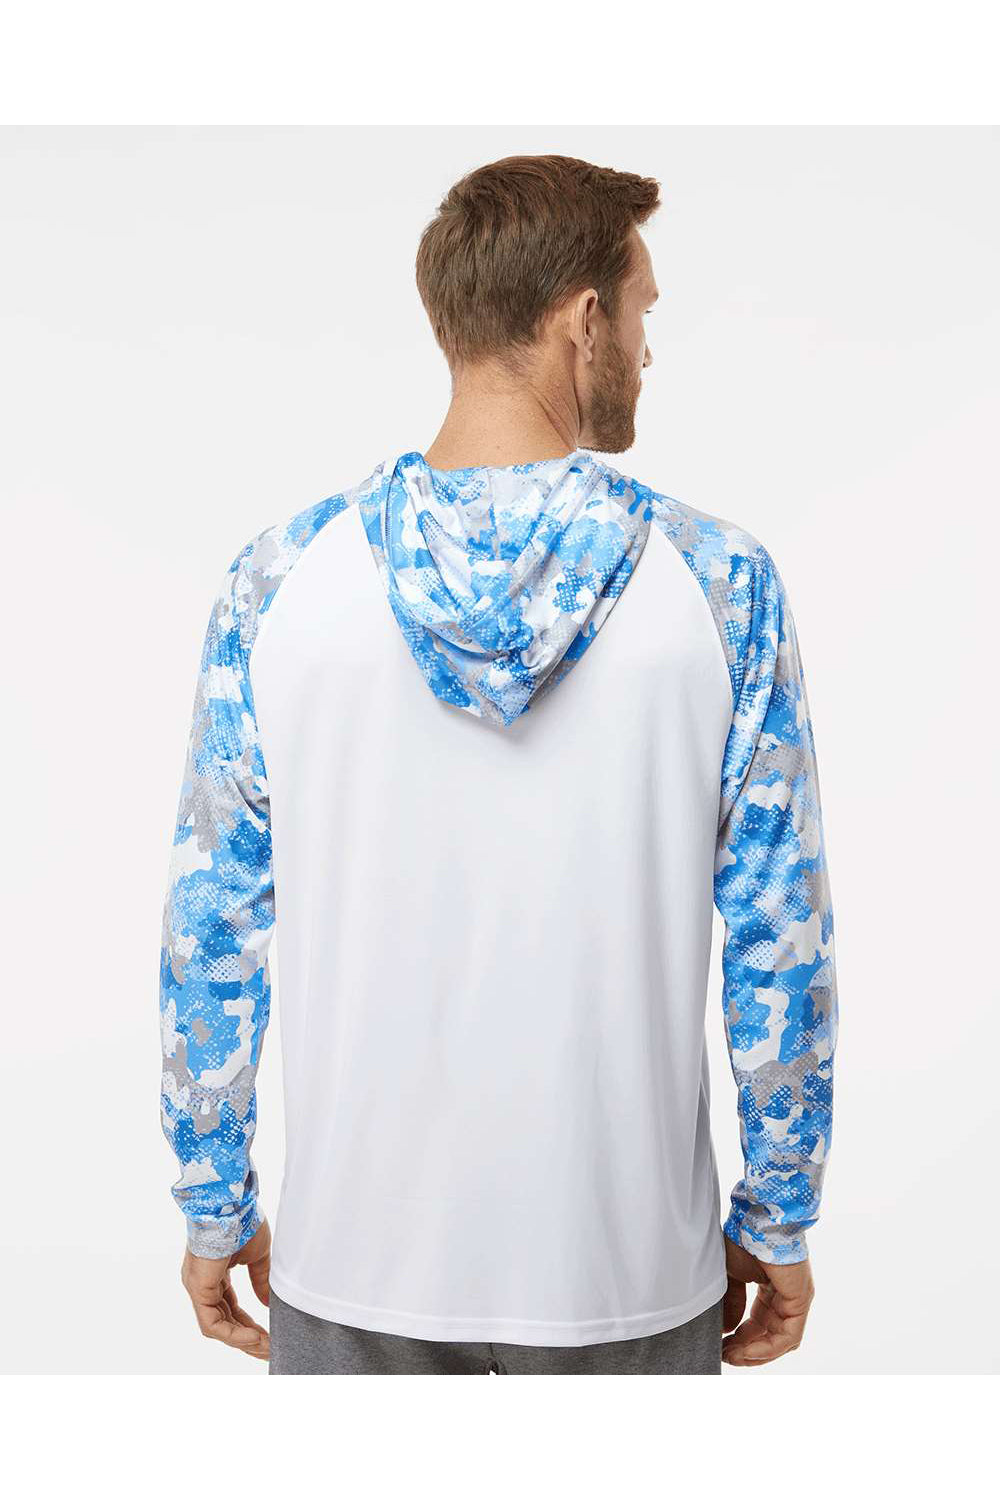 Paragon 240 Mens Tortuga Extreme Performance Long Sleeve Hooded T-Shirt Hoodie White/Blue Mist Camo Model Back